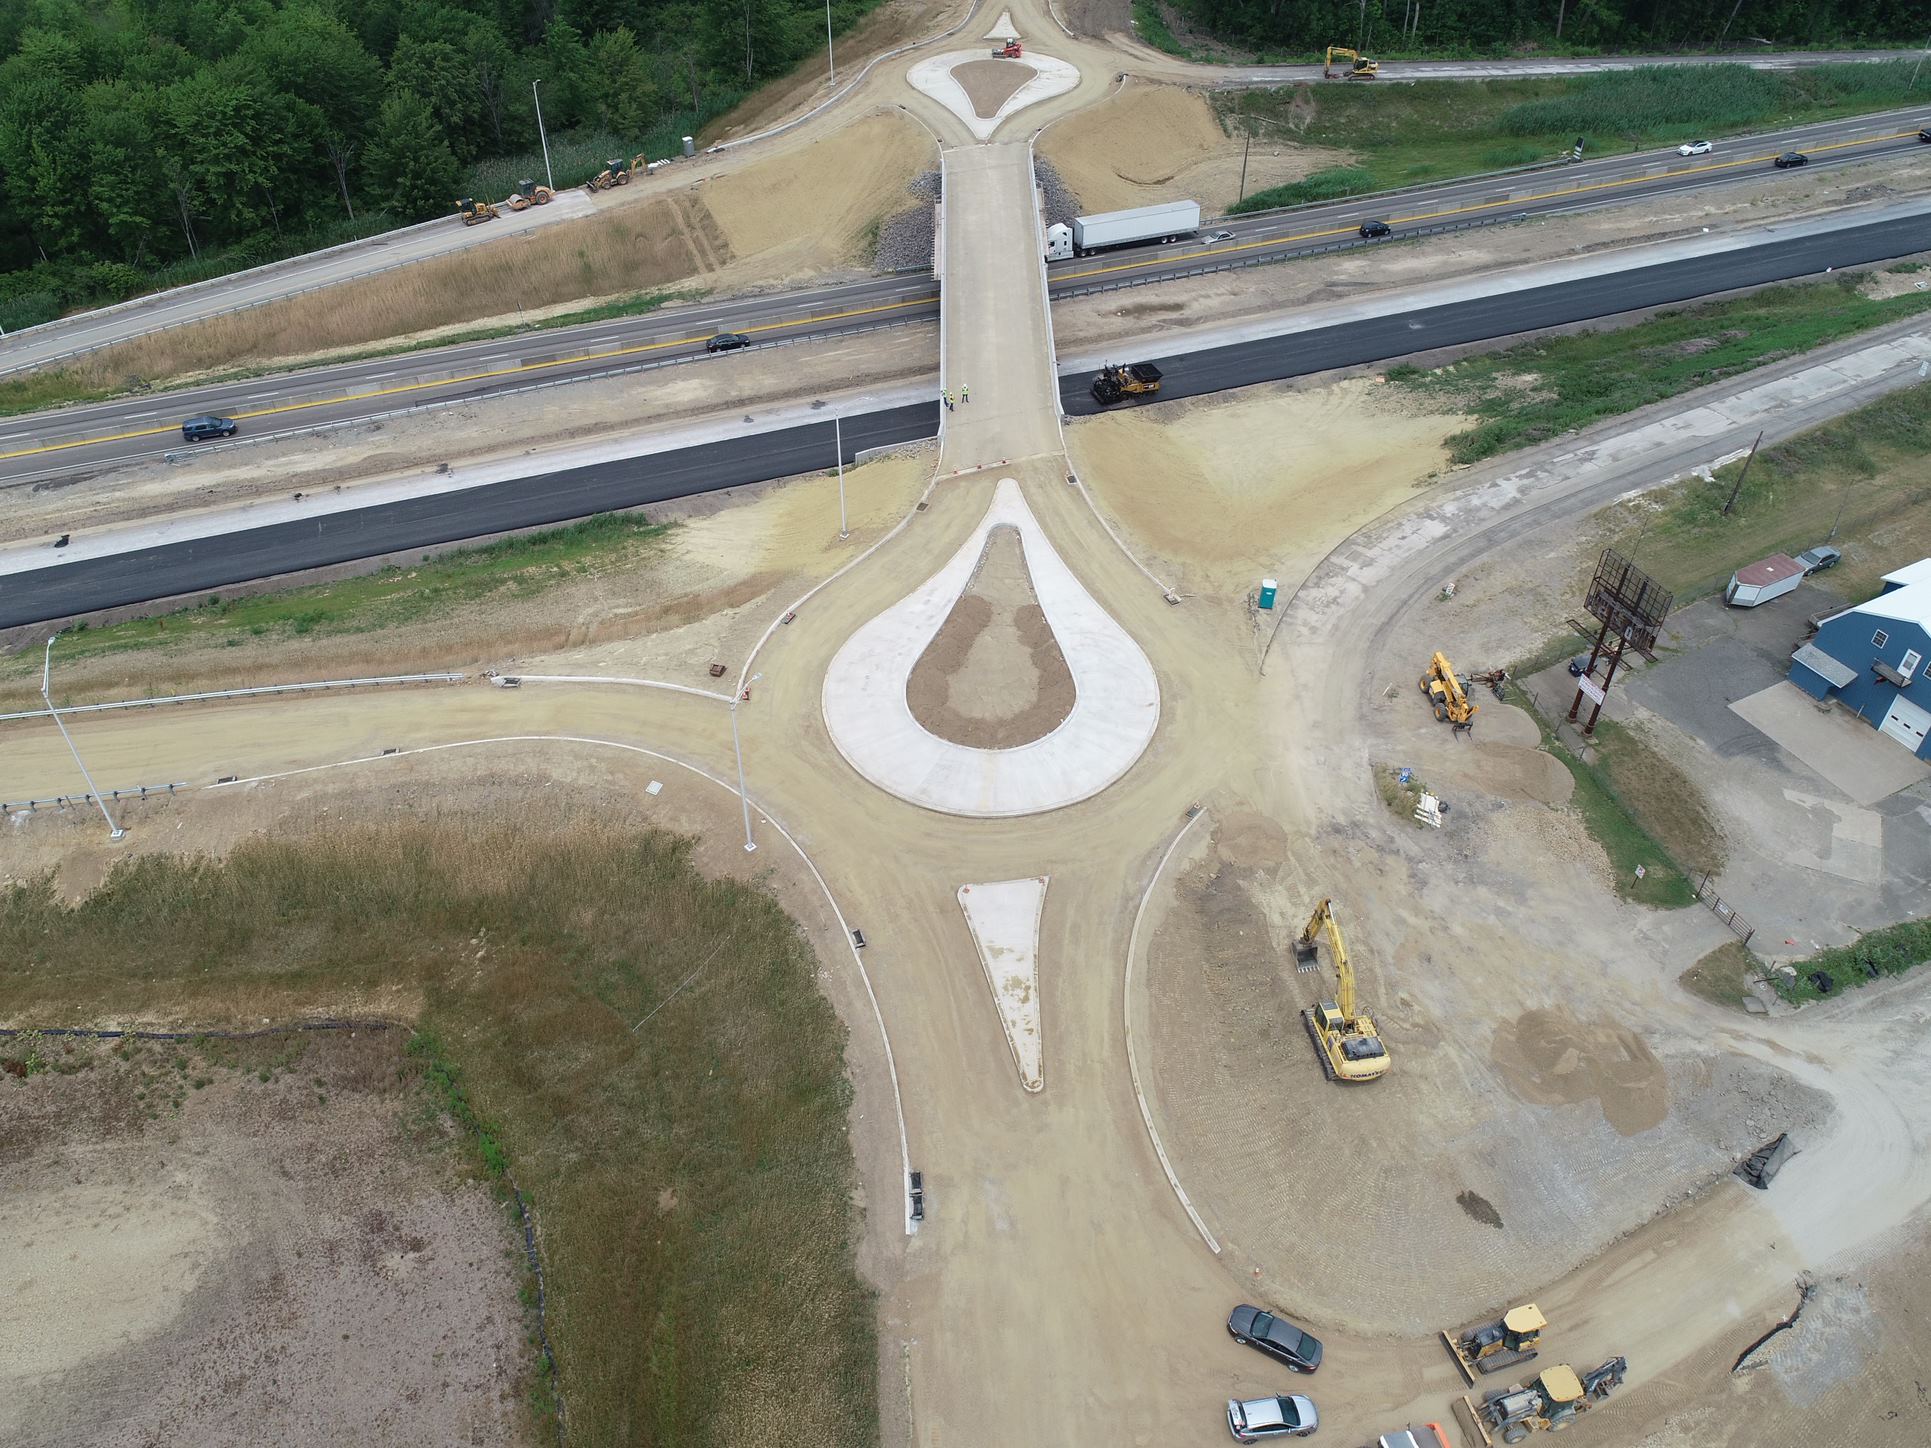 Overhead view of two teardrop roundabouts being constructed over a major highway.